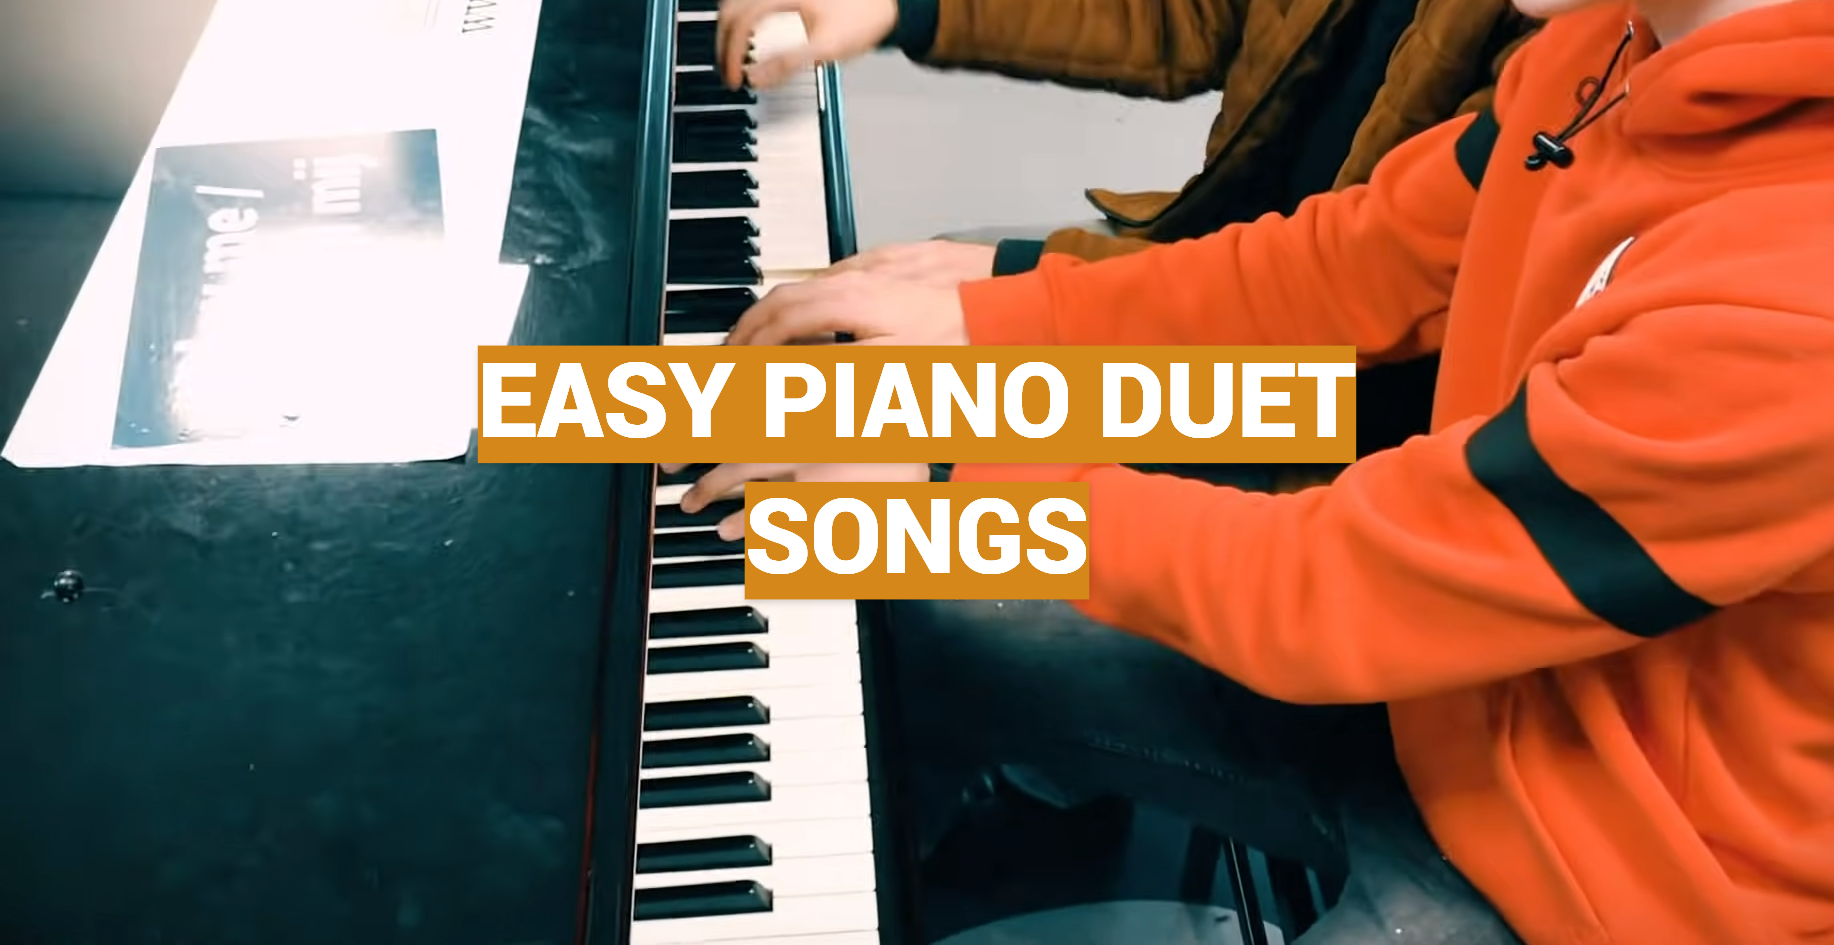 Easy Piano Duet Songs